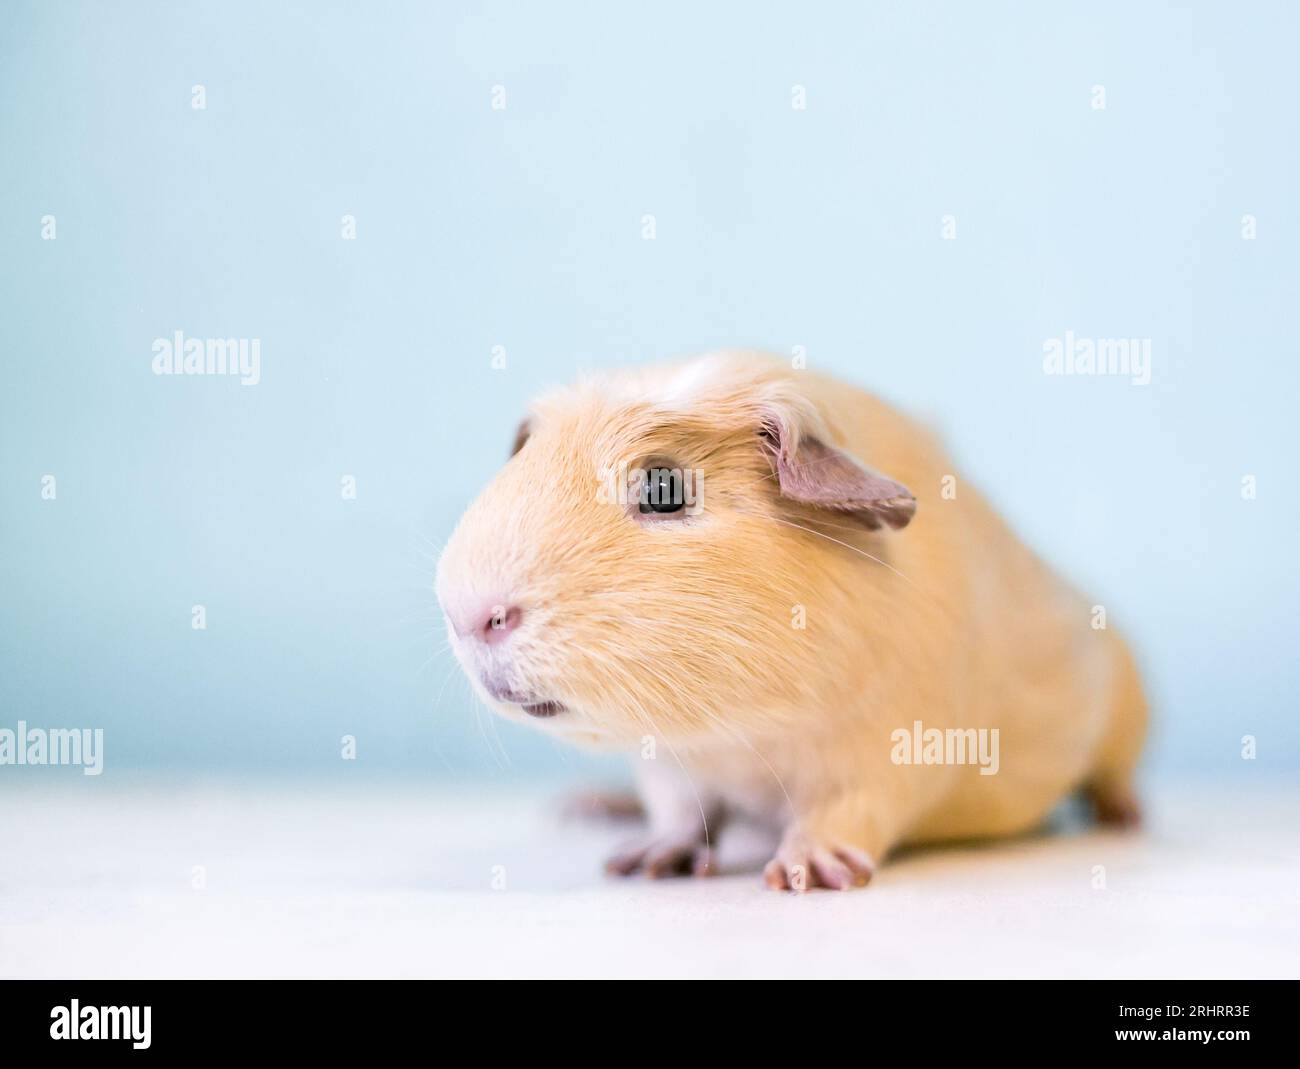 A cute pet American Guinea Pig looking at the camera Stock Photo